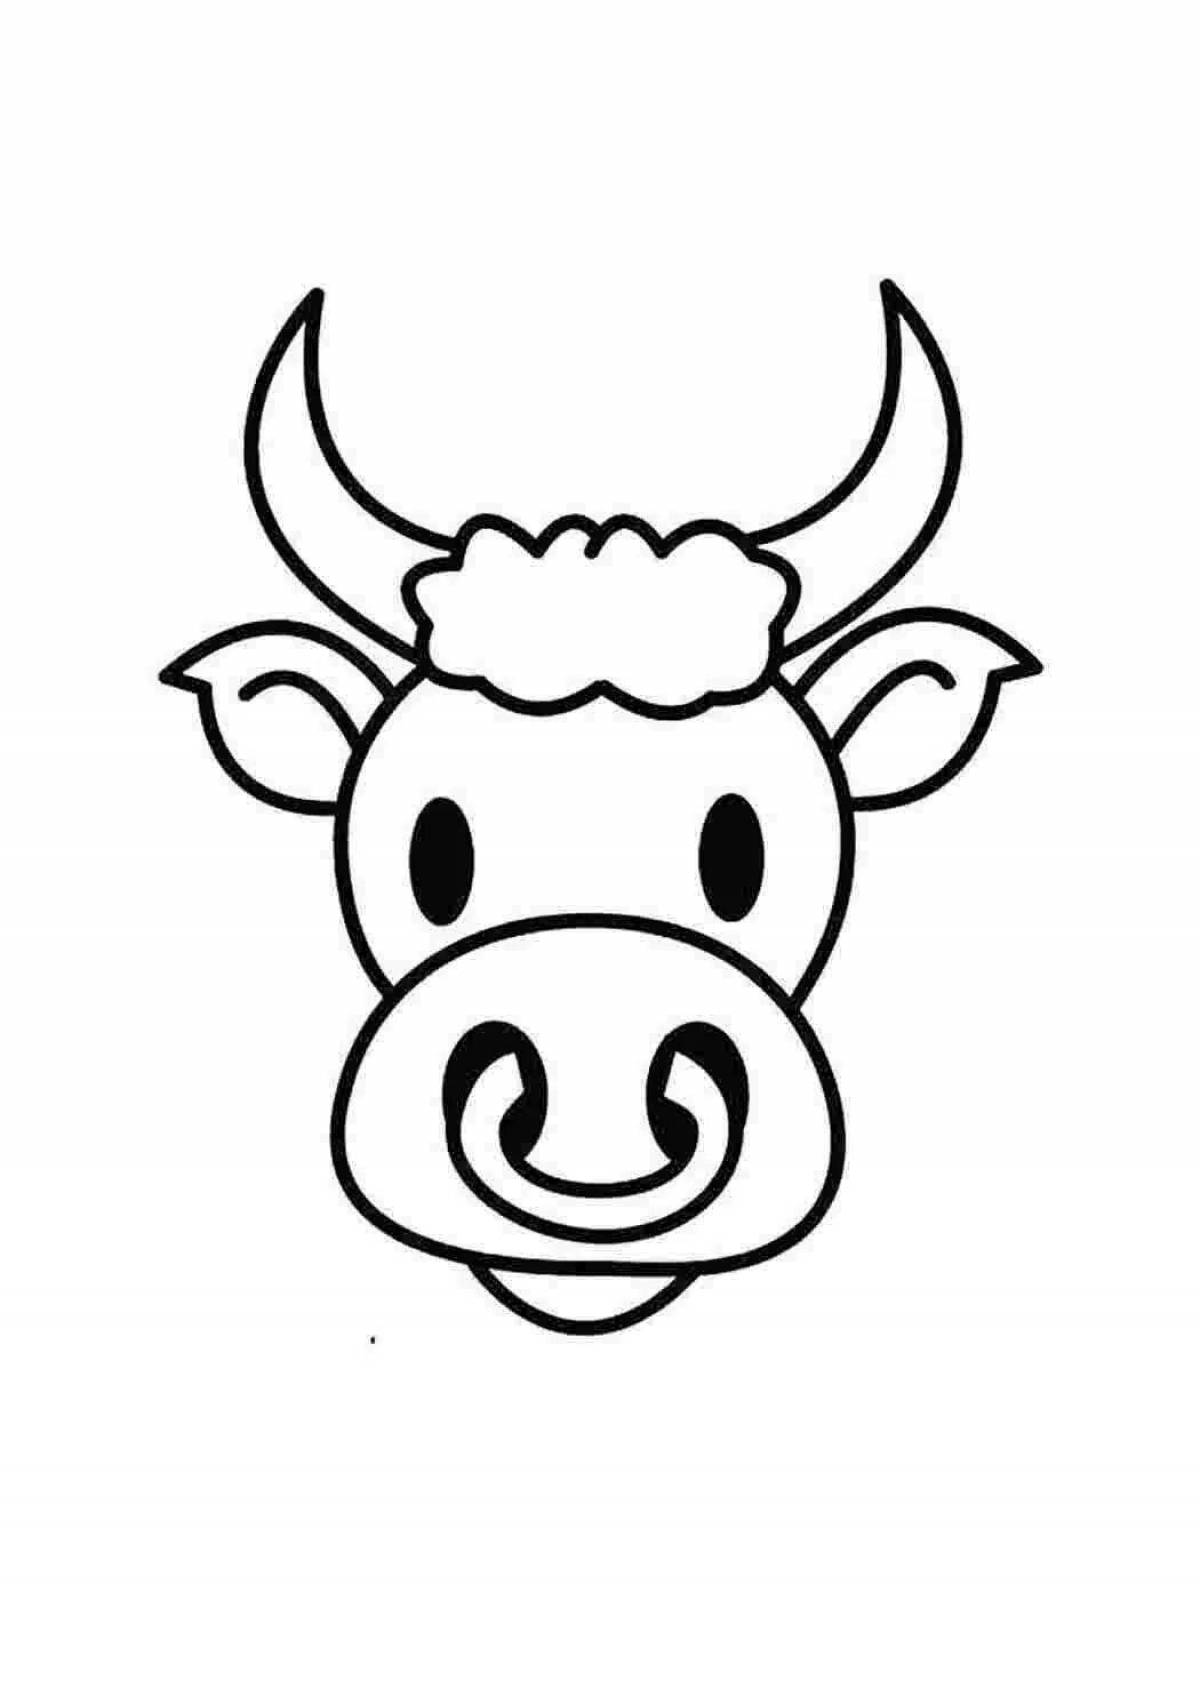 Coloring page thoughtful cow head